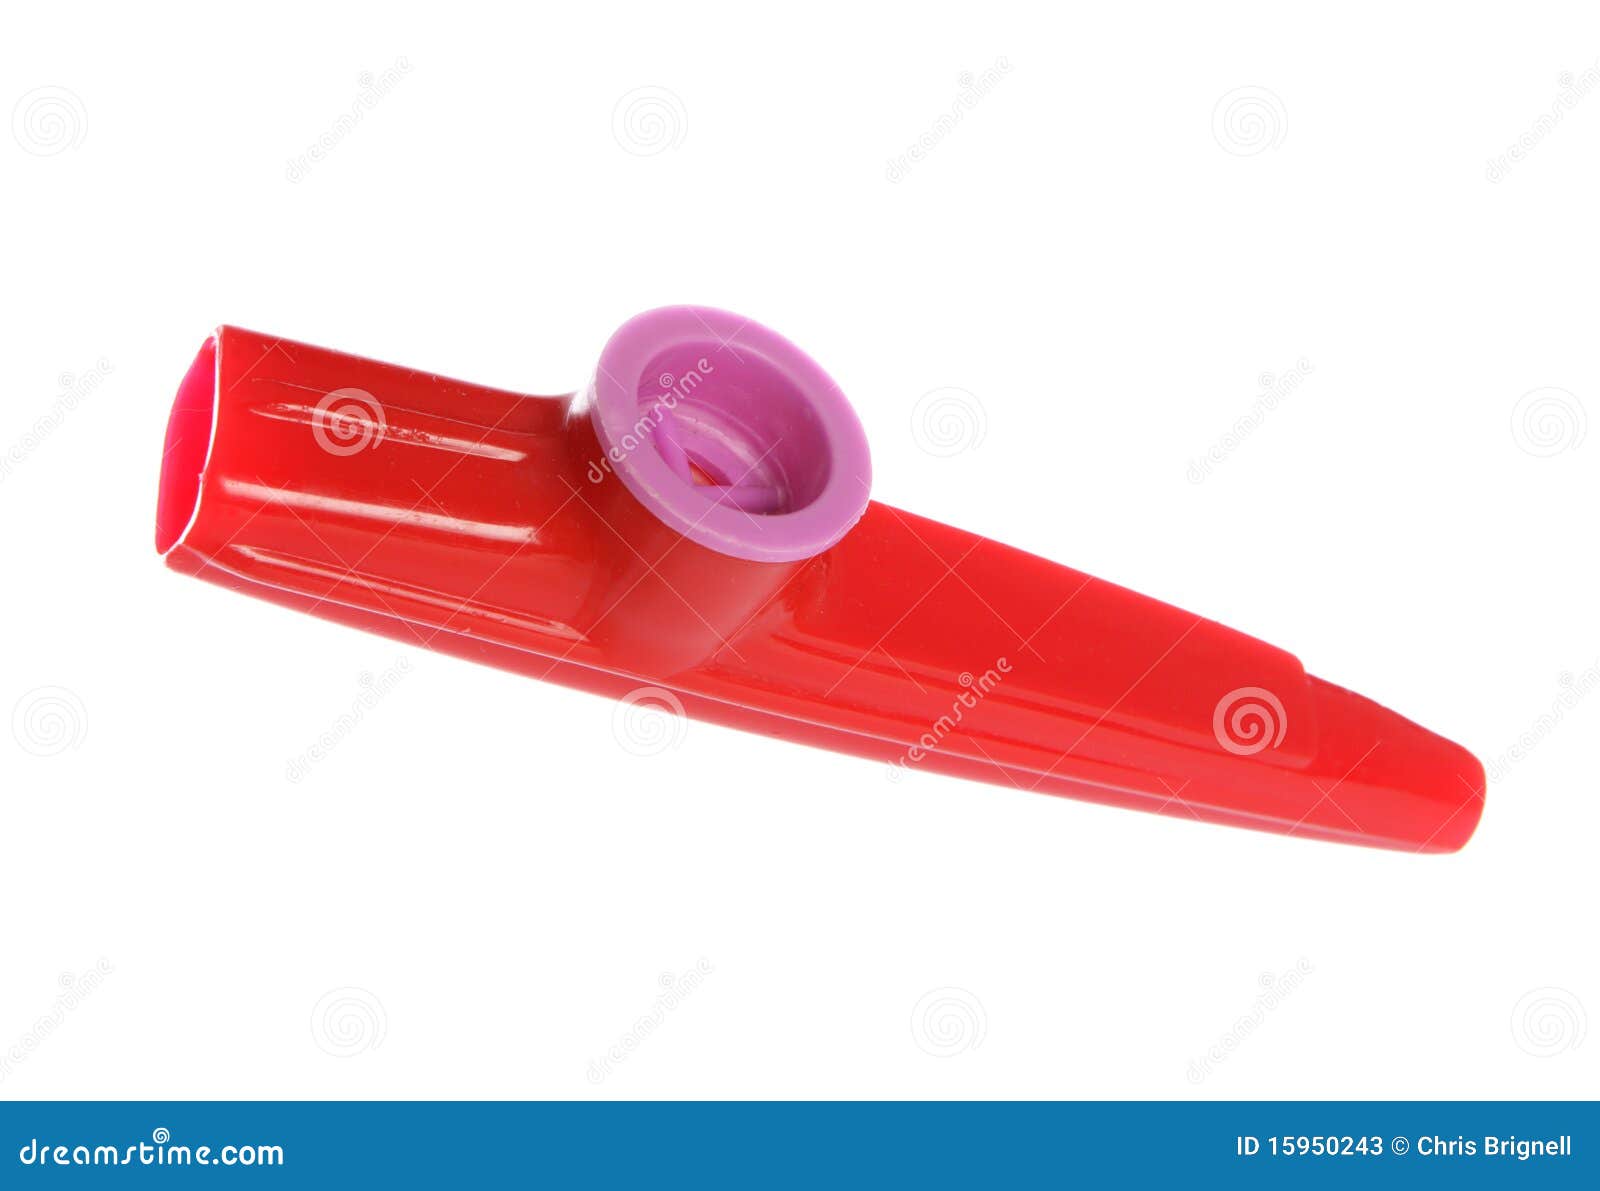 childs red kazoo